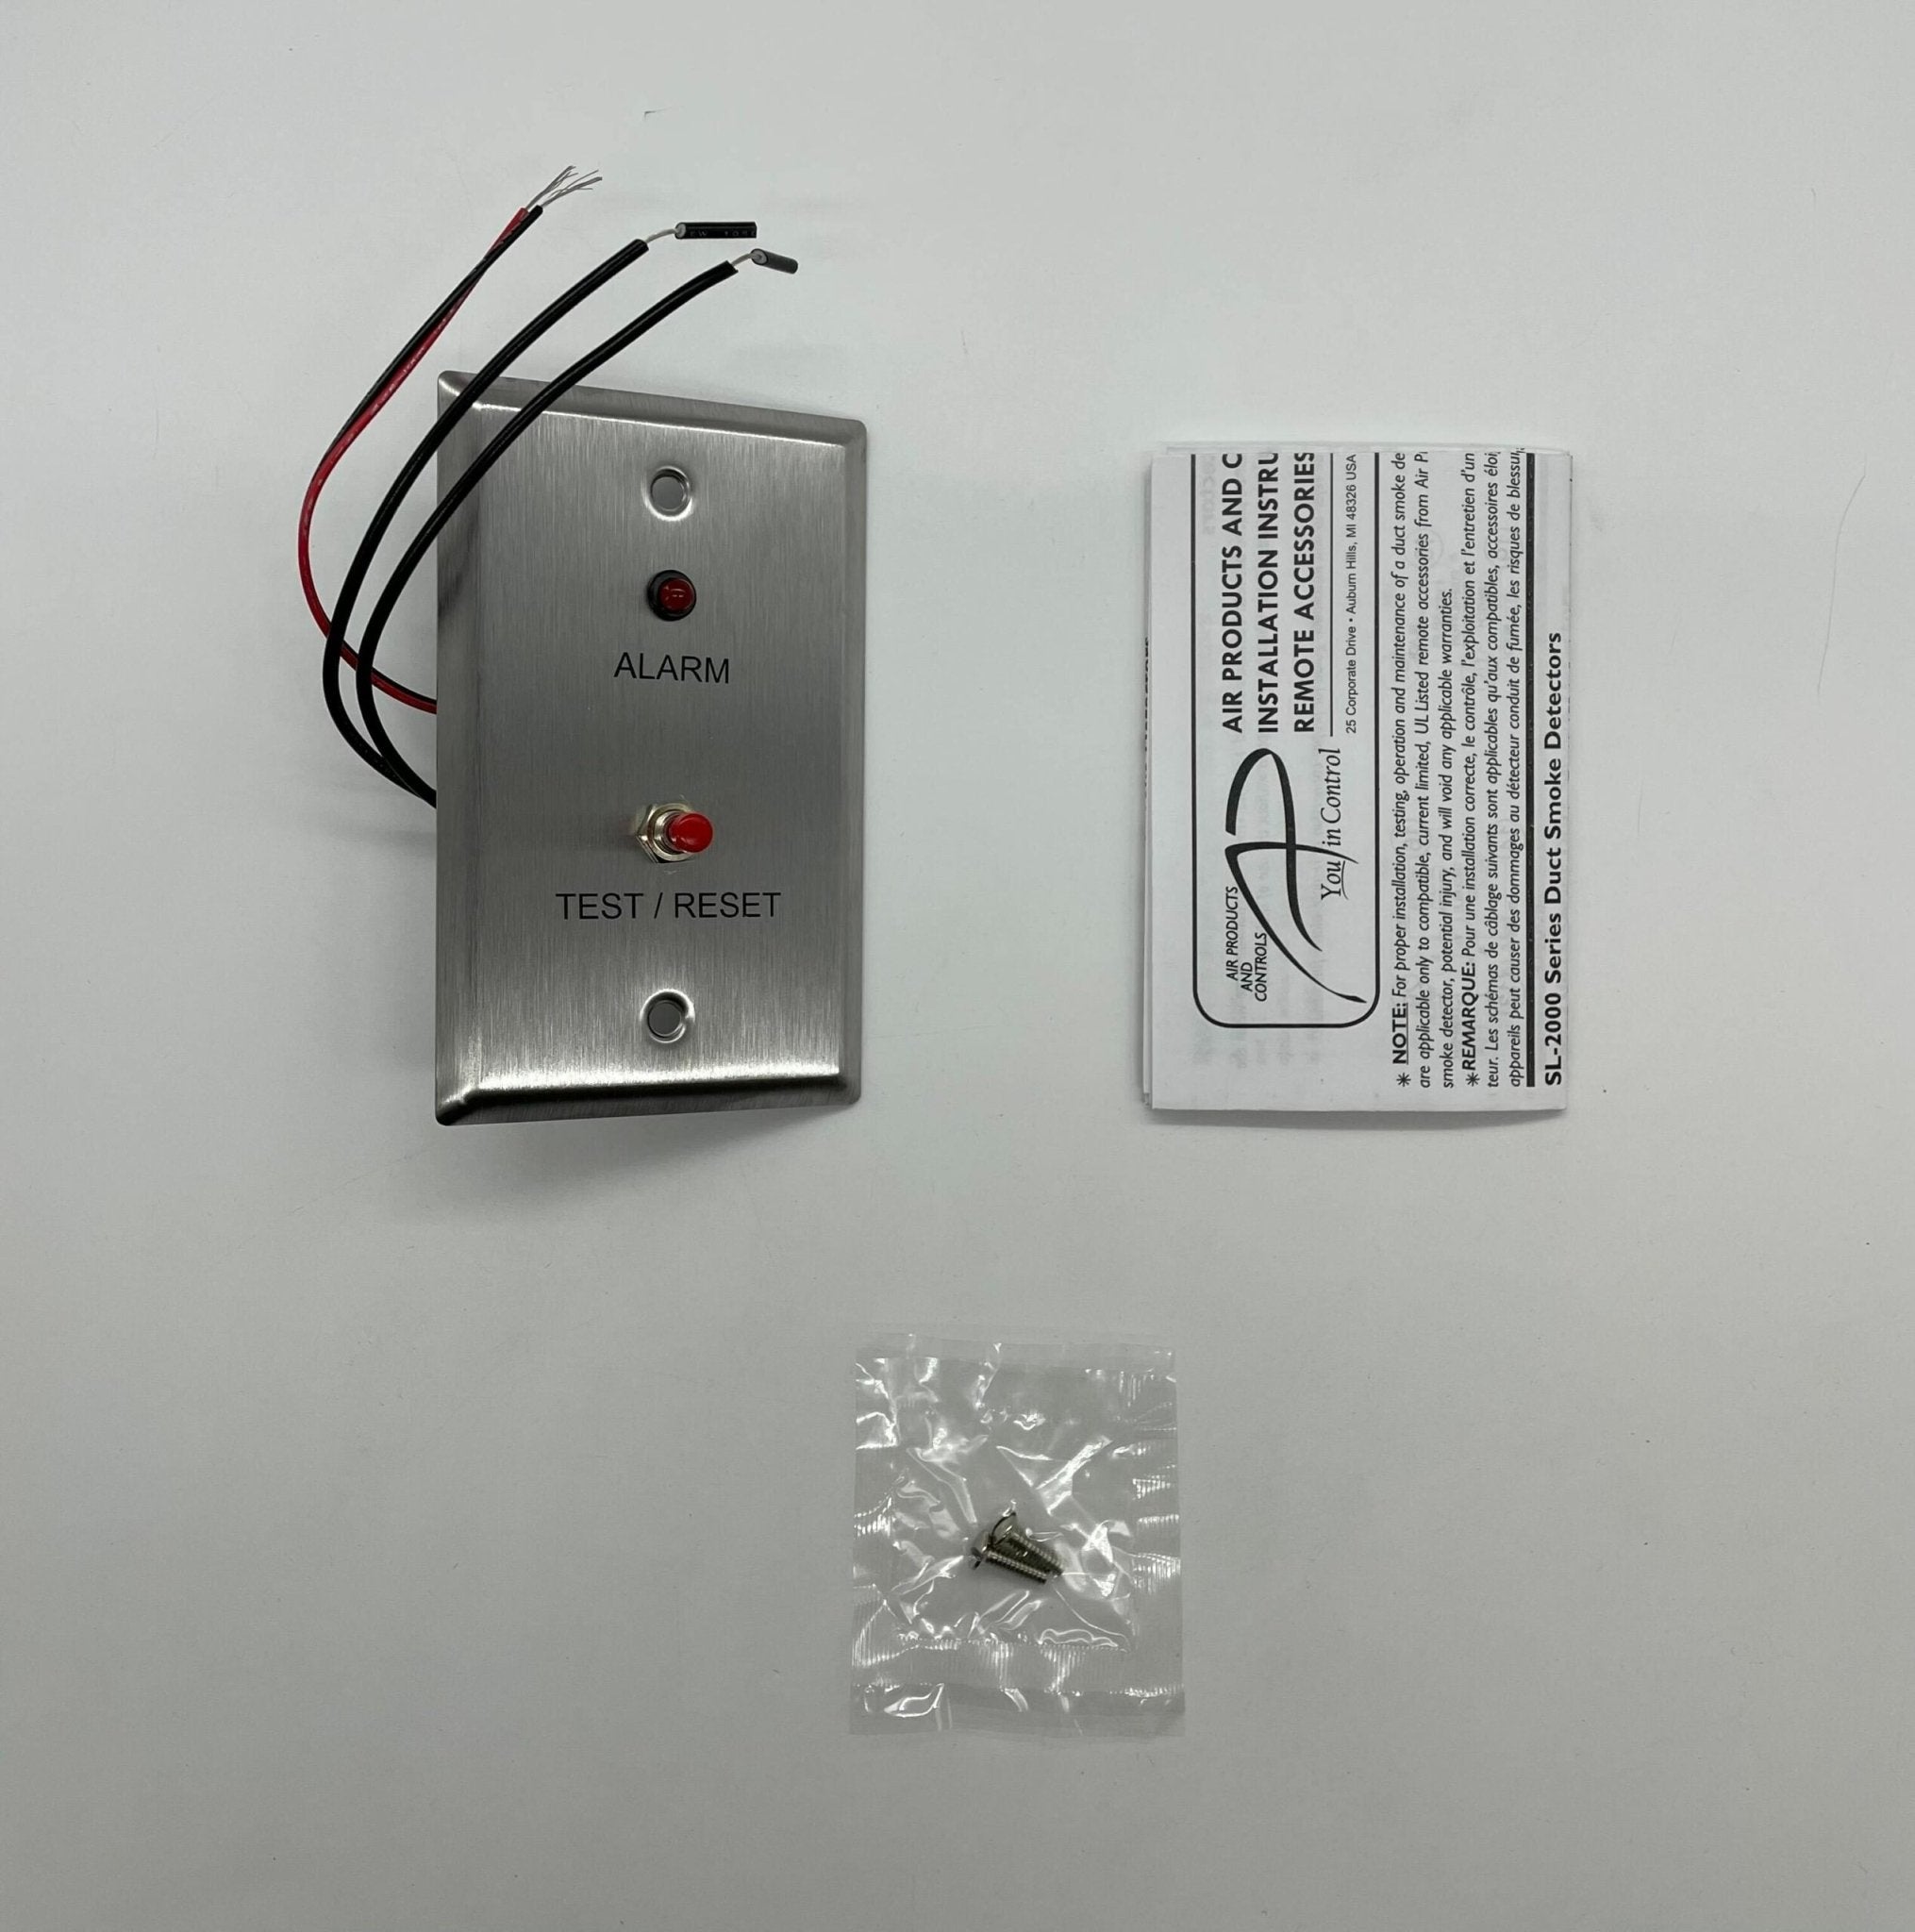 Potter MS-RA/R - The Fire Alarm Supplier